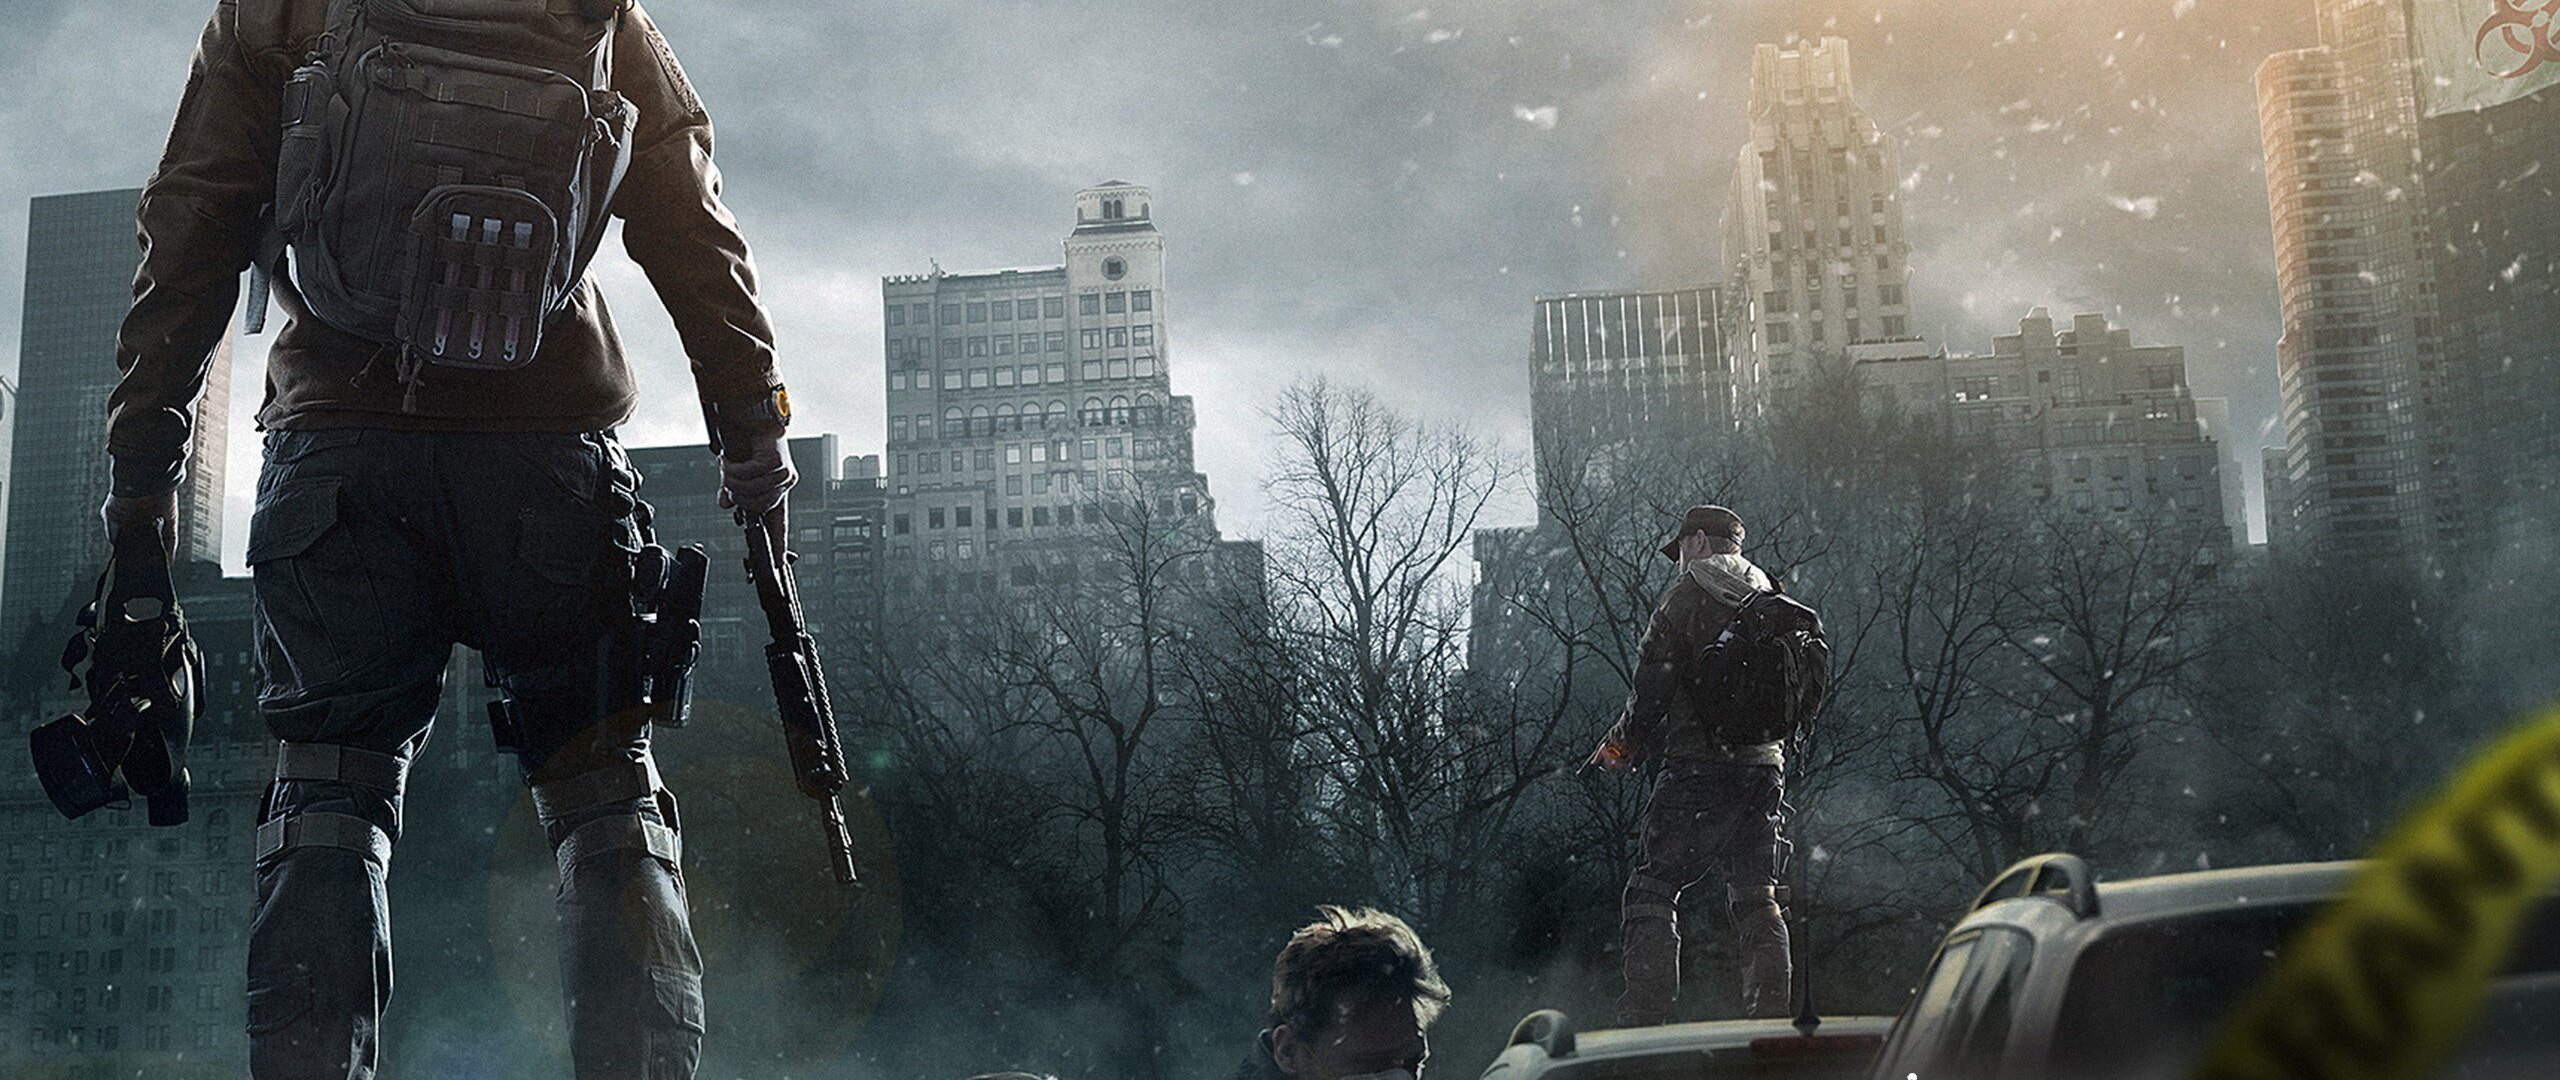 Tom clancy 39. Tom Clancy's the Division. The Division чистильщики. Том Клэнси игра. Картинки the Division.